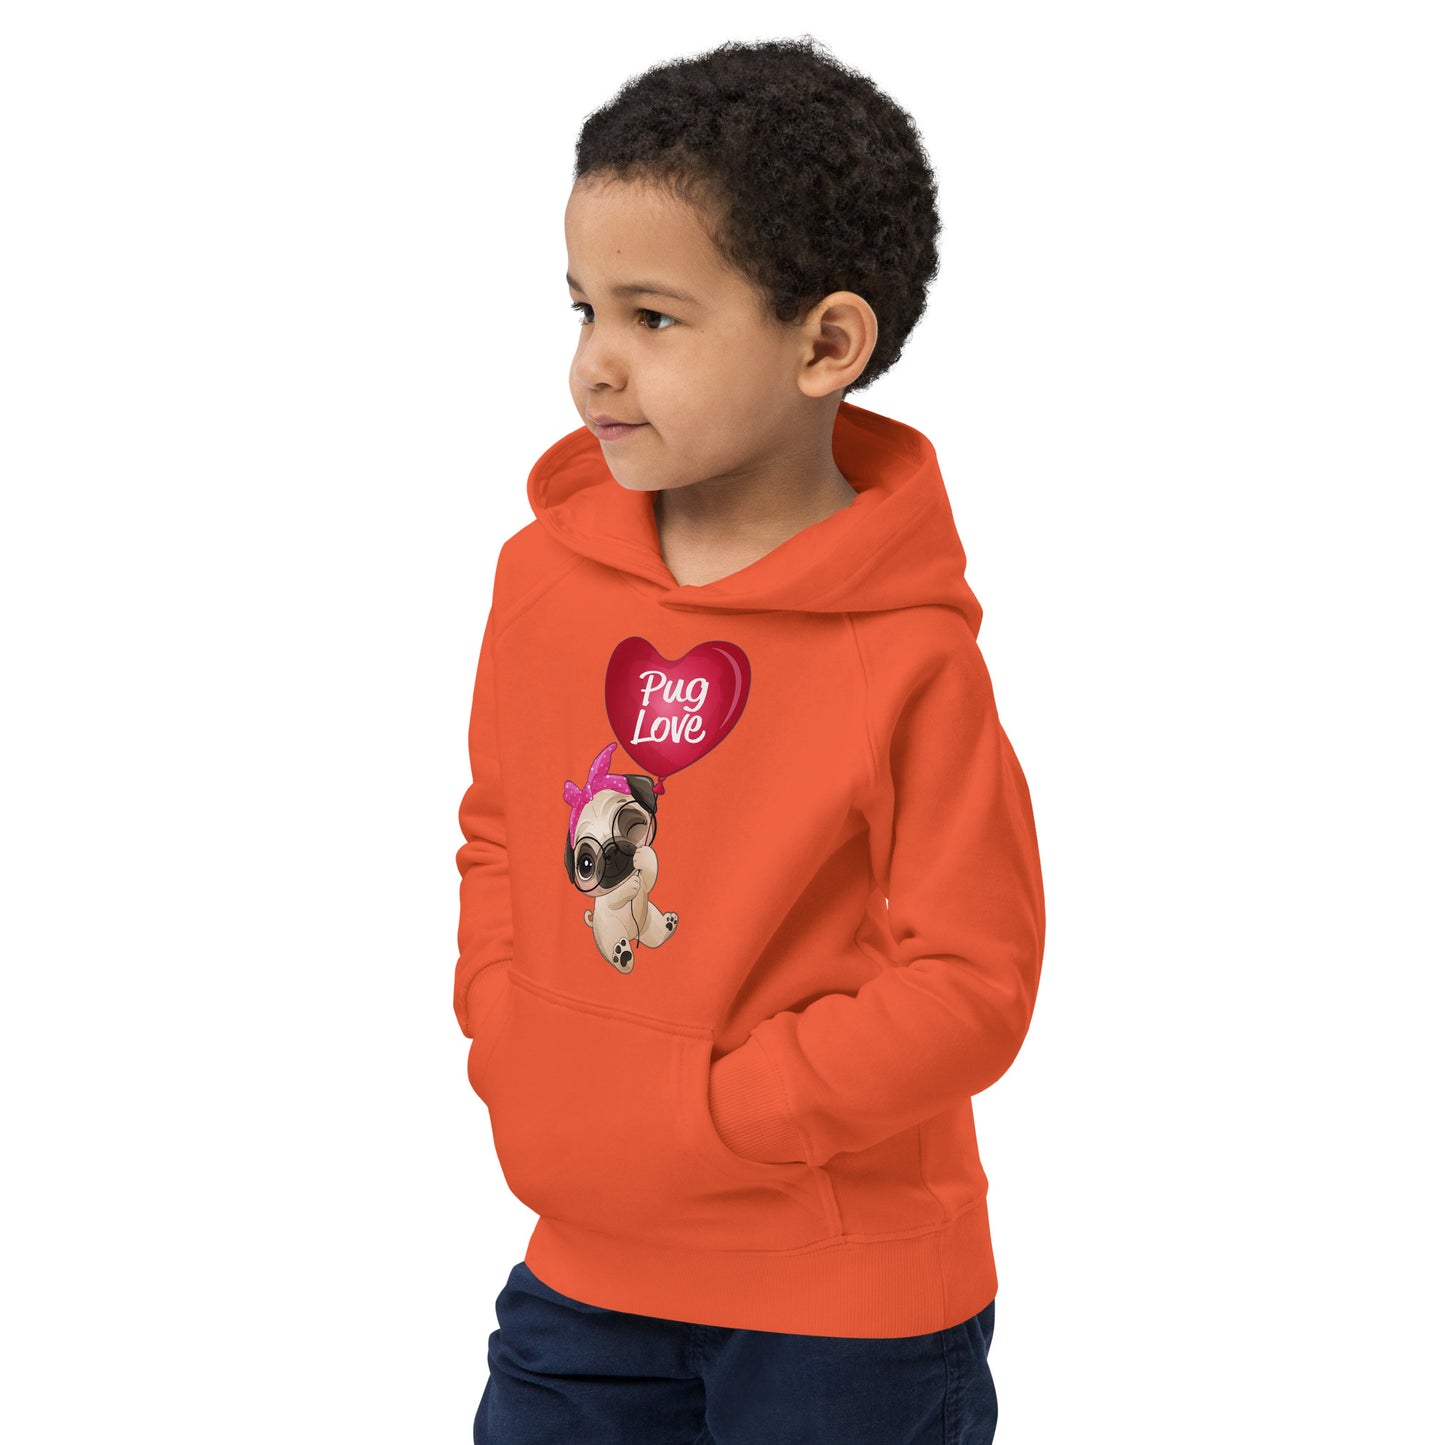 Puppy Pug Dog Flying with Balloon Hoodie, No. 0490